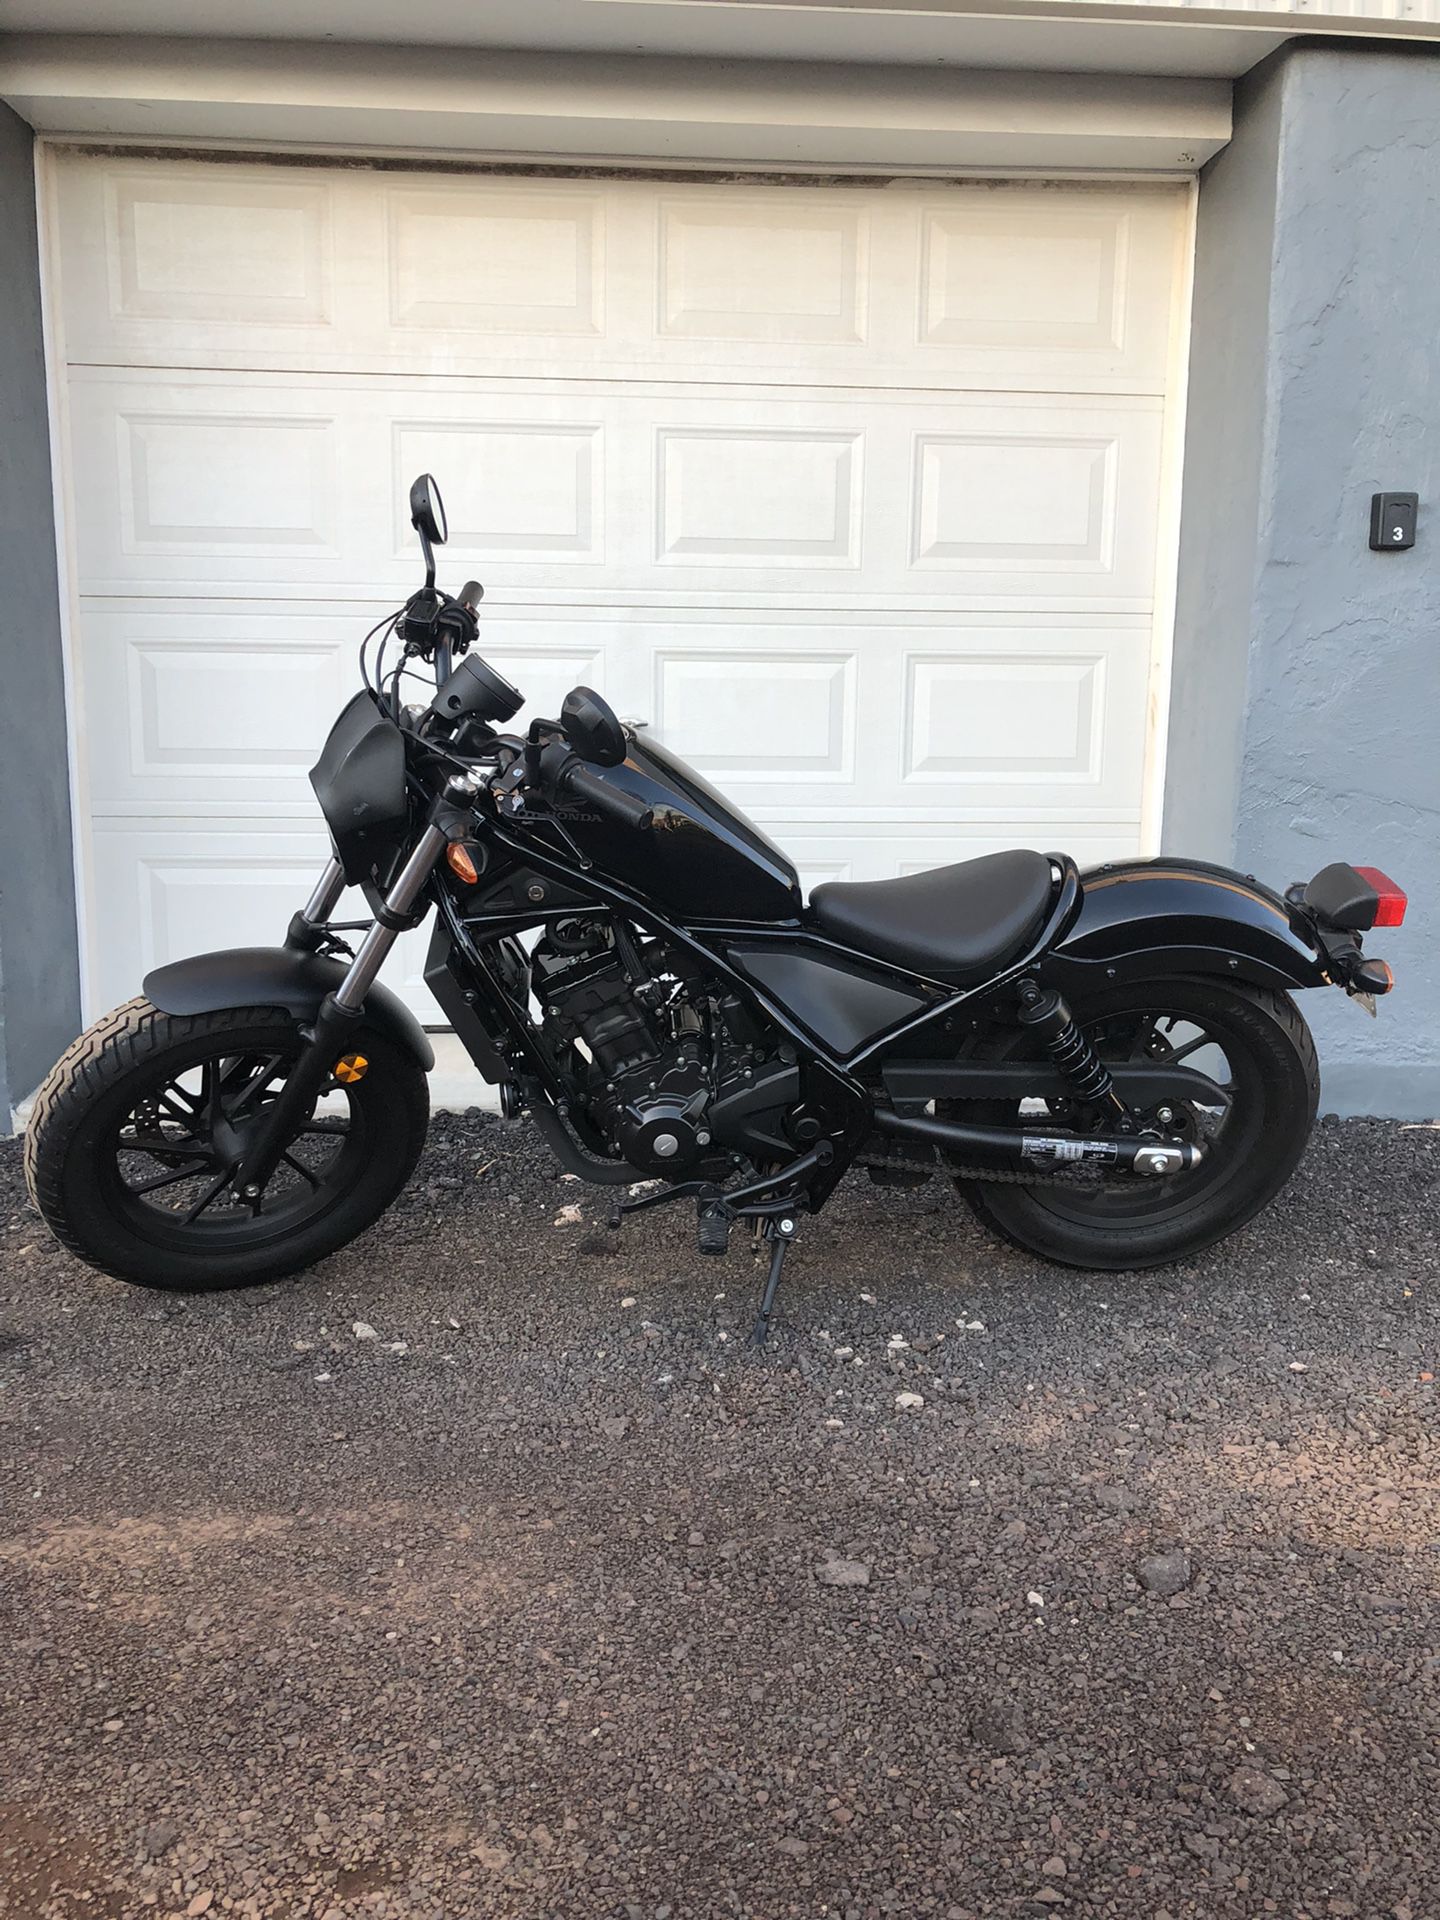 Honda Rebel (contact info removed)